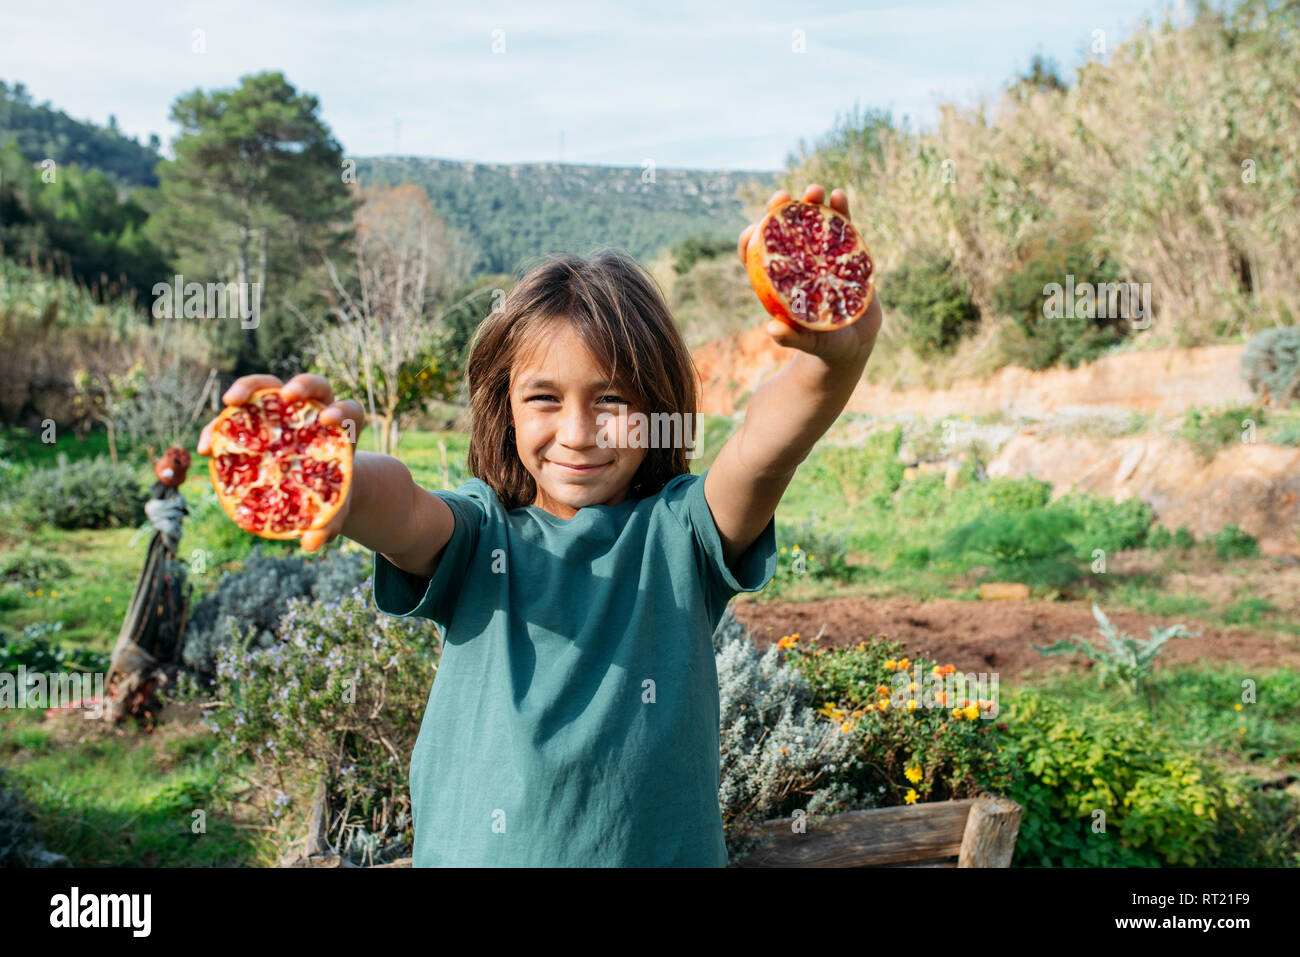 Boy holding halved pomegranate in an orchard Stock Photo